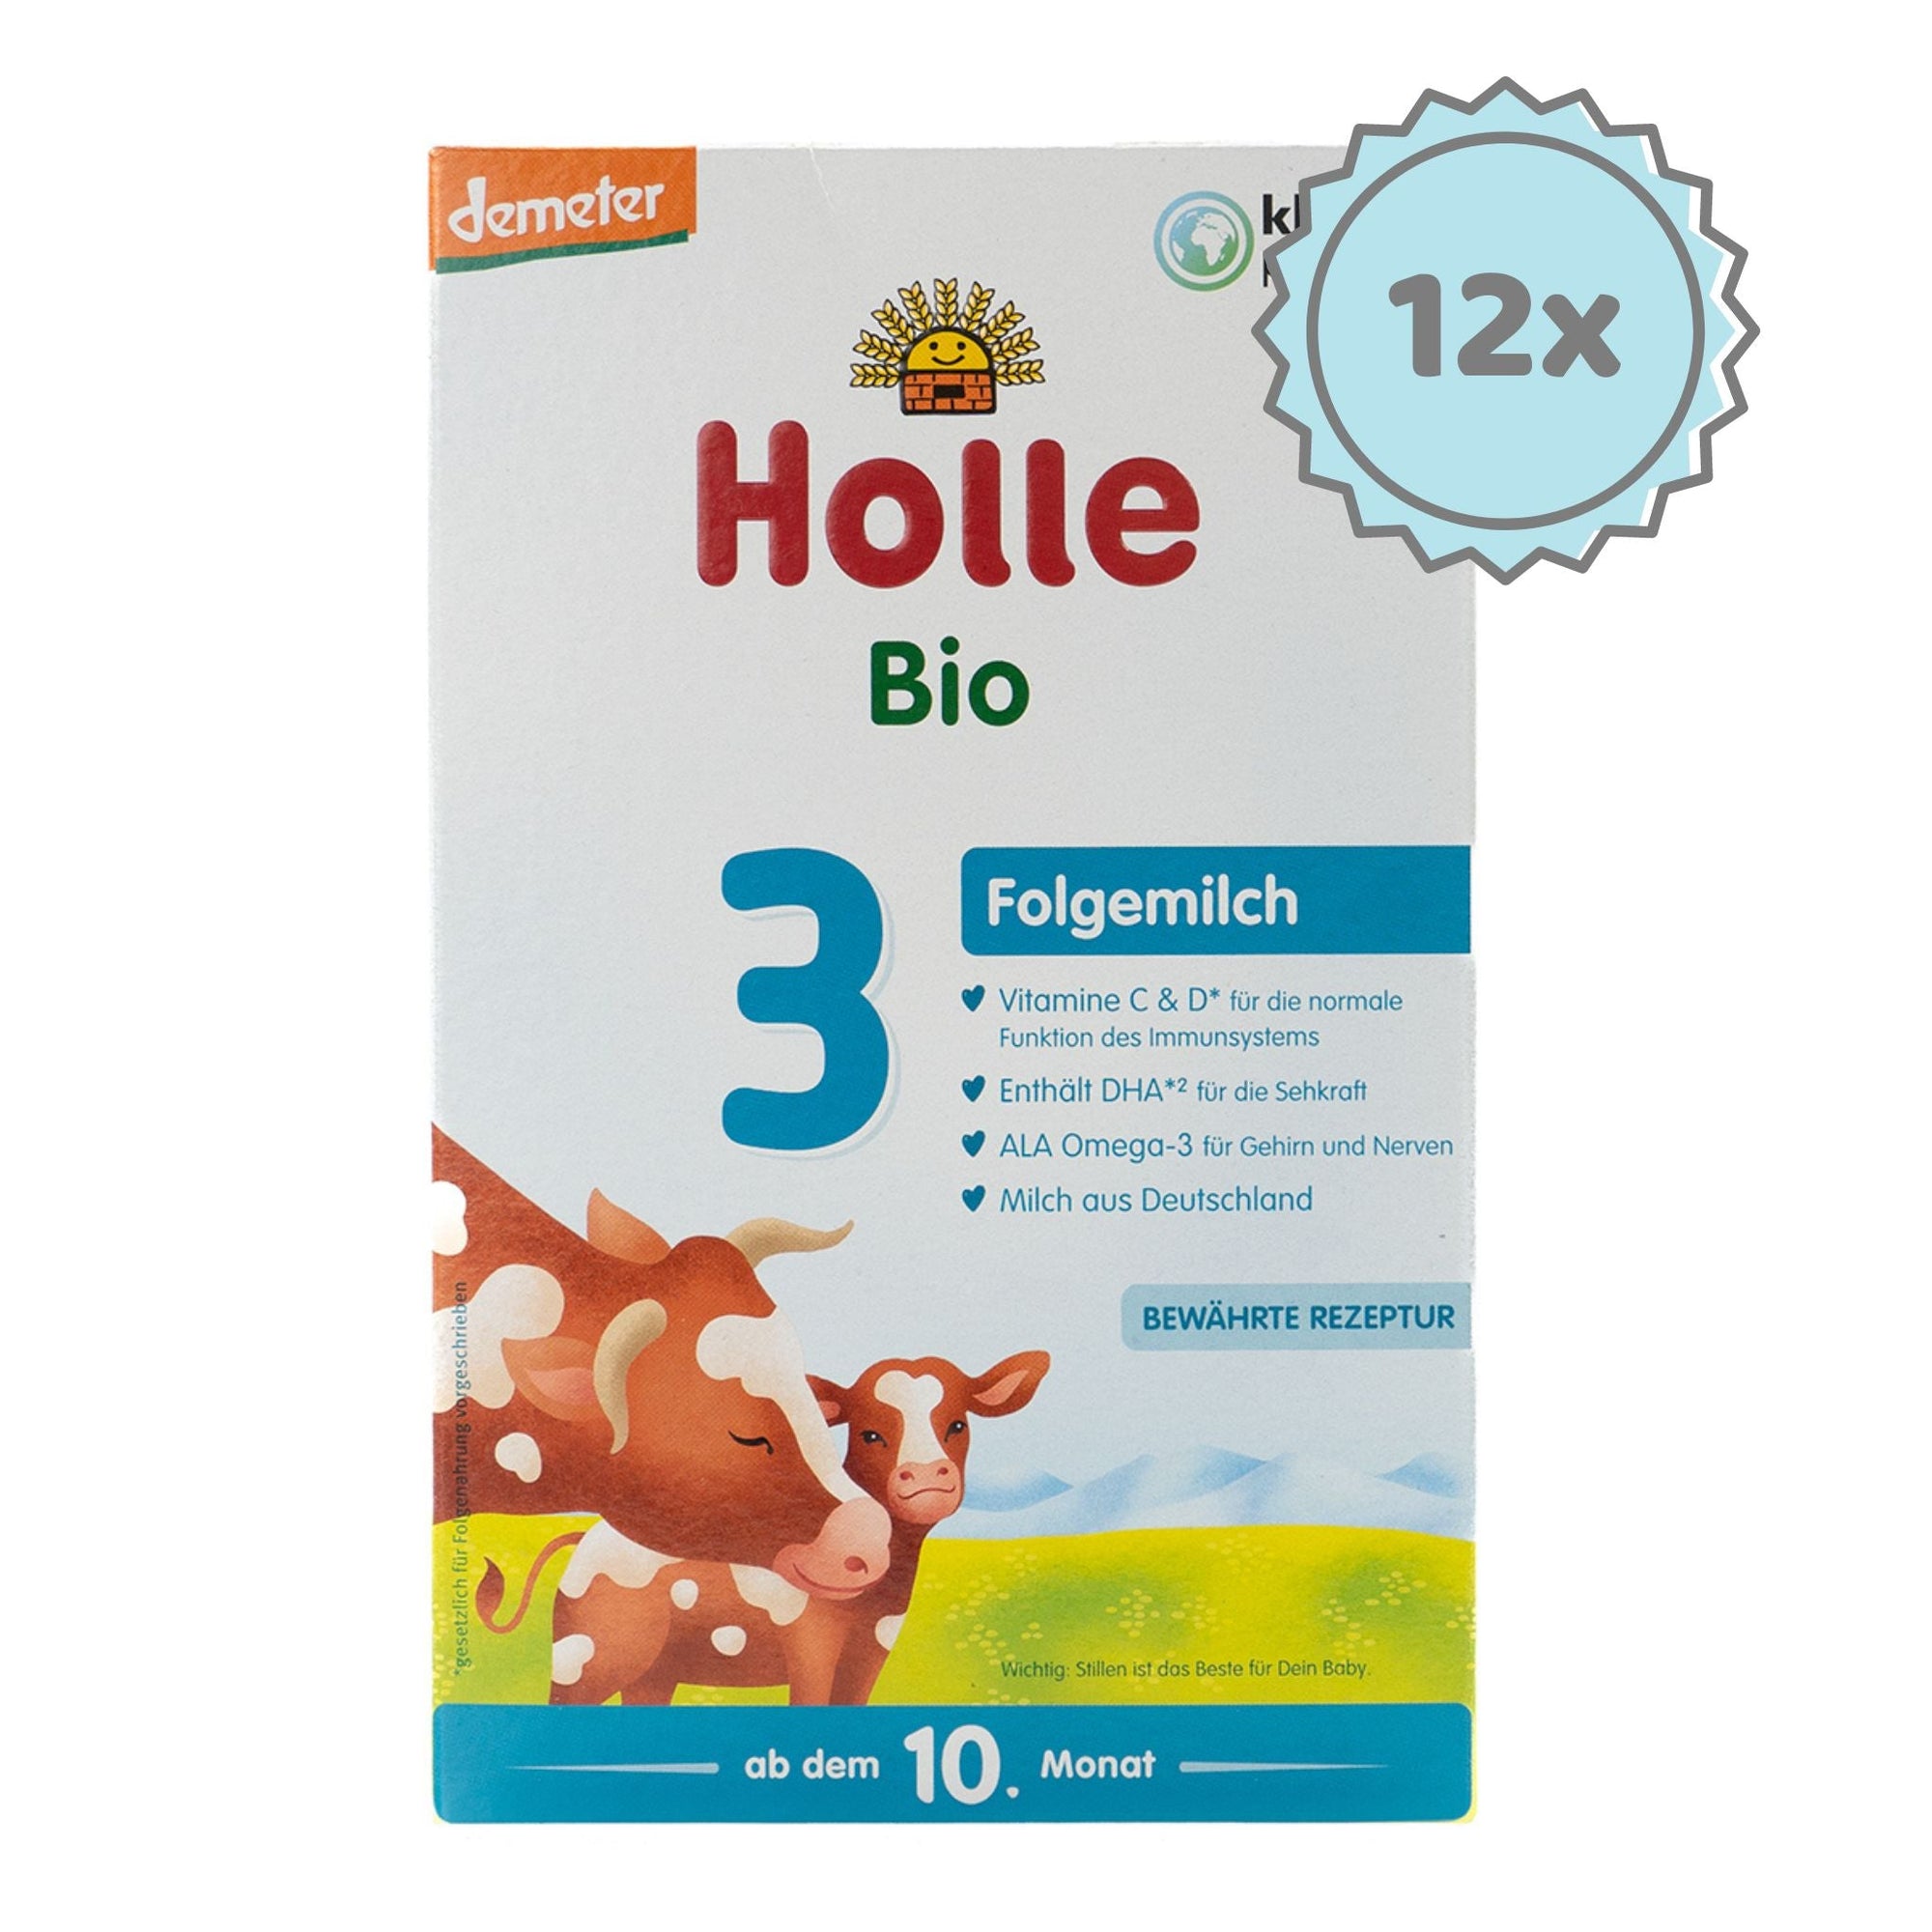 Holle Stage 3 (10-12 Months) |  European Organic Baby Formula | 12 boxes